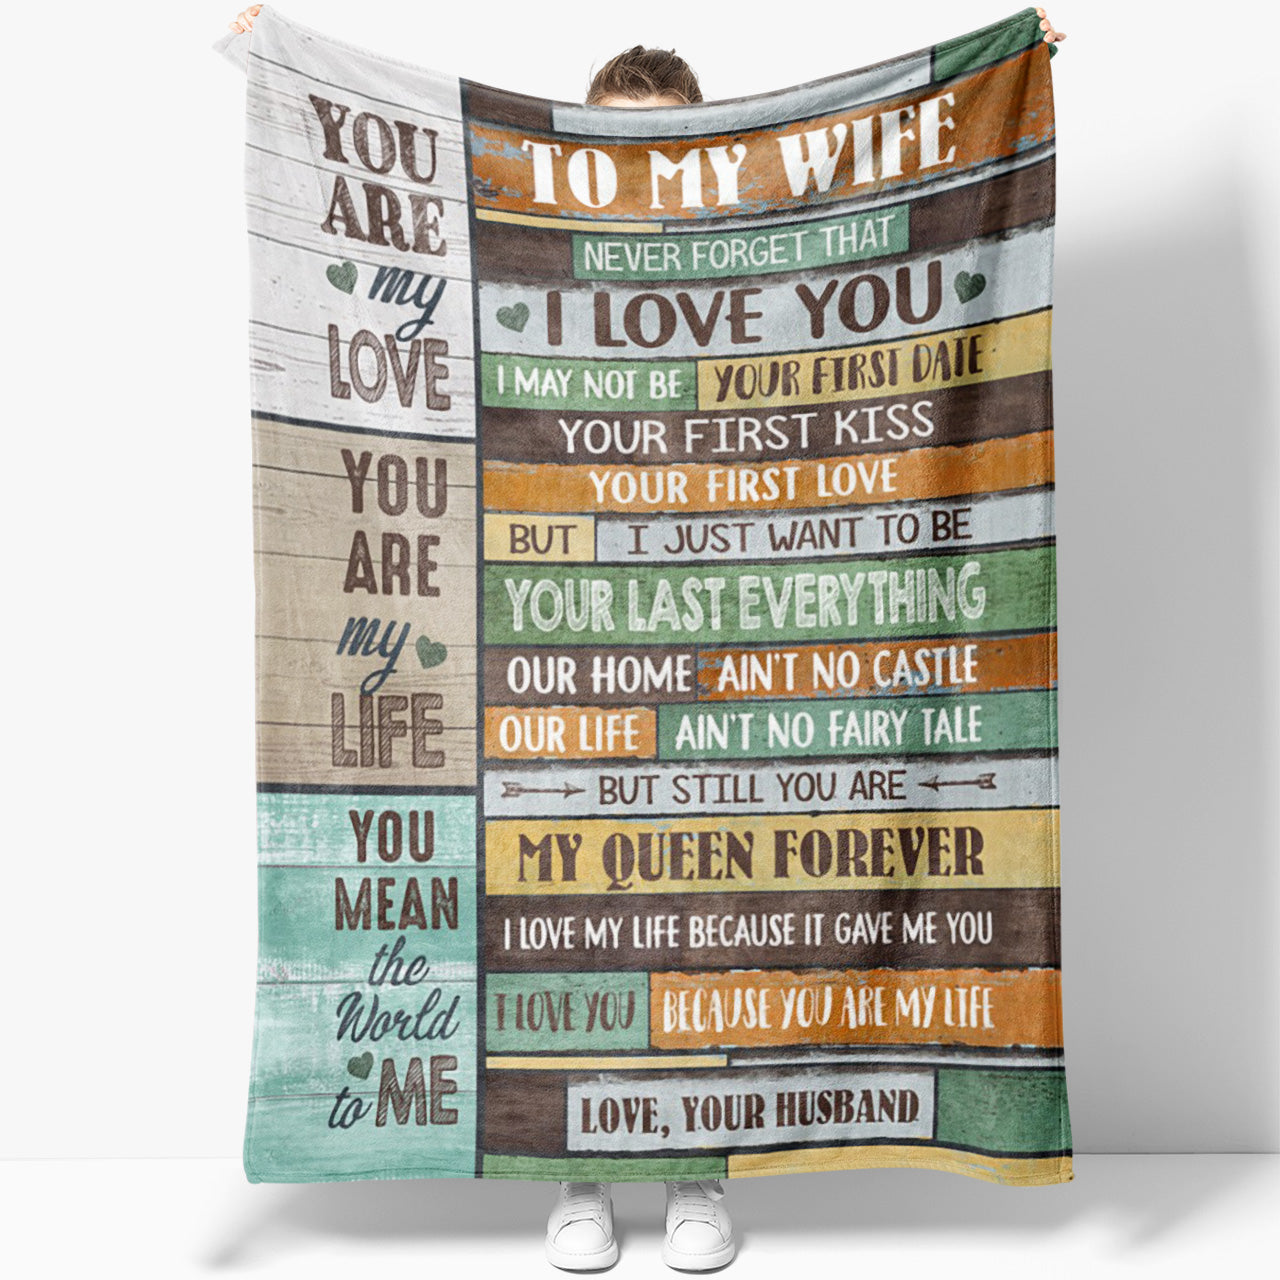 Blanket Gift For Wife, Christmas Presents For Her, Presents For Her, You Are